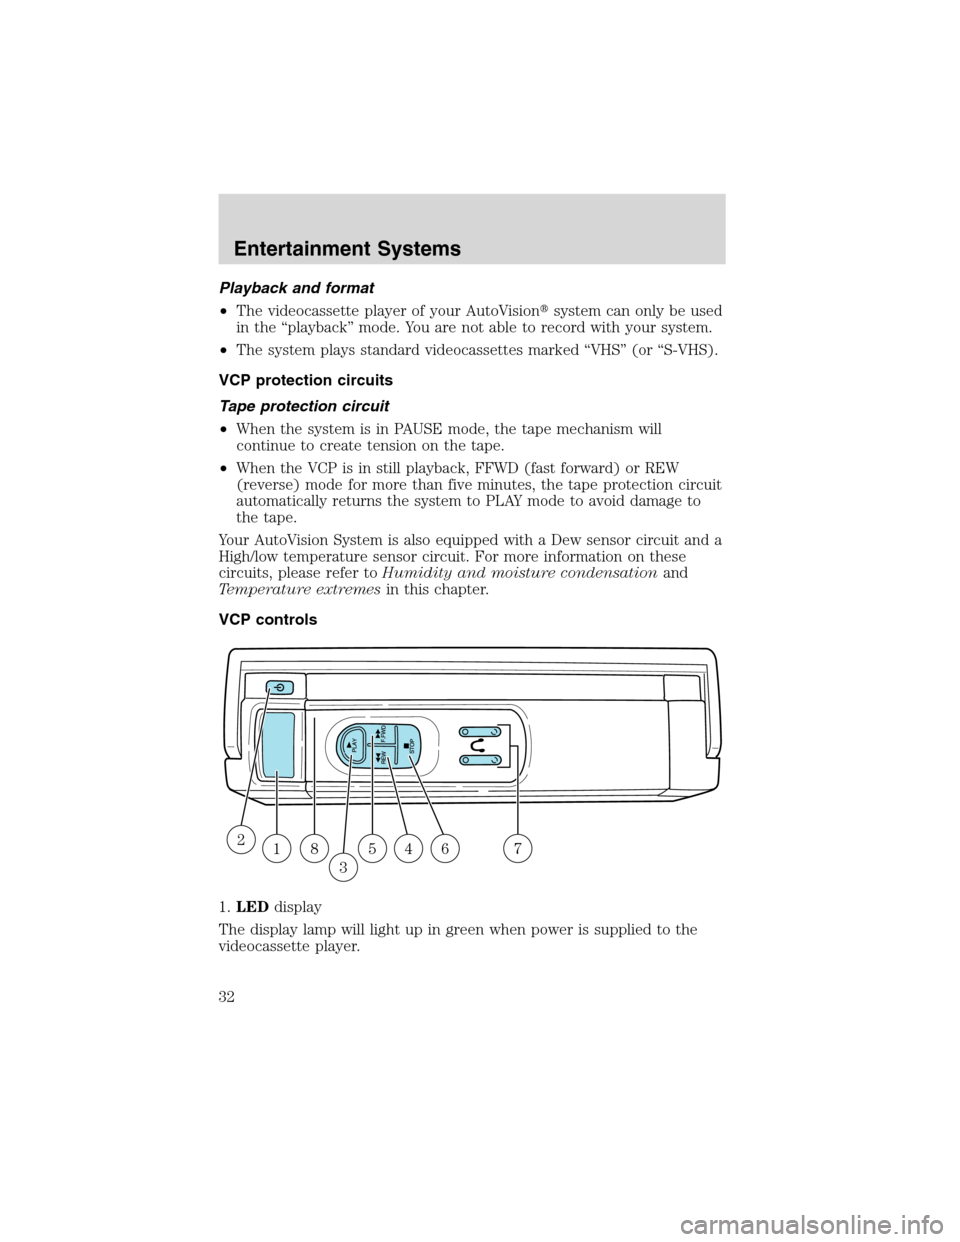 FORD E SERIES 2003 4.G Owners Guide Playback and format
•The videocassette player of your AutoVisionsystem can only be used
in the“playback”mode. You are not able to record with your system.
•The system plays standard videocass